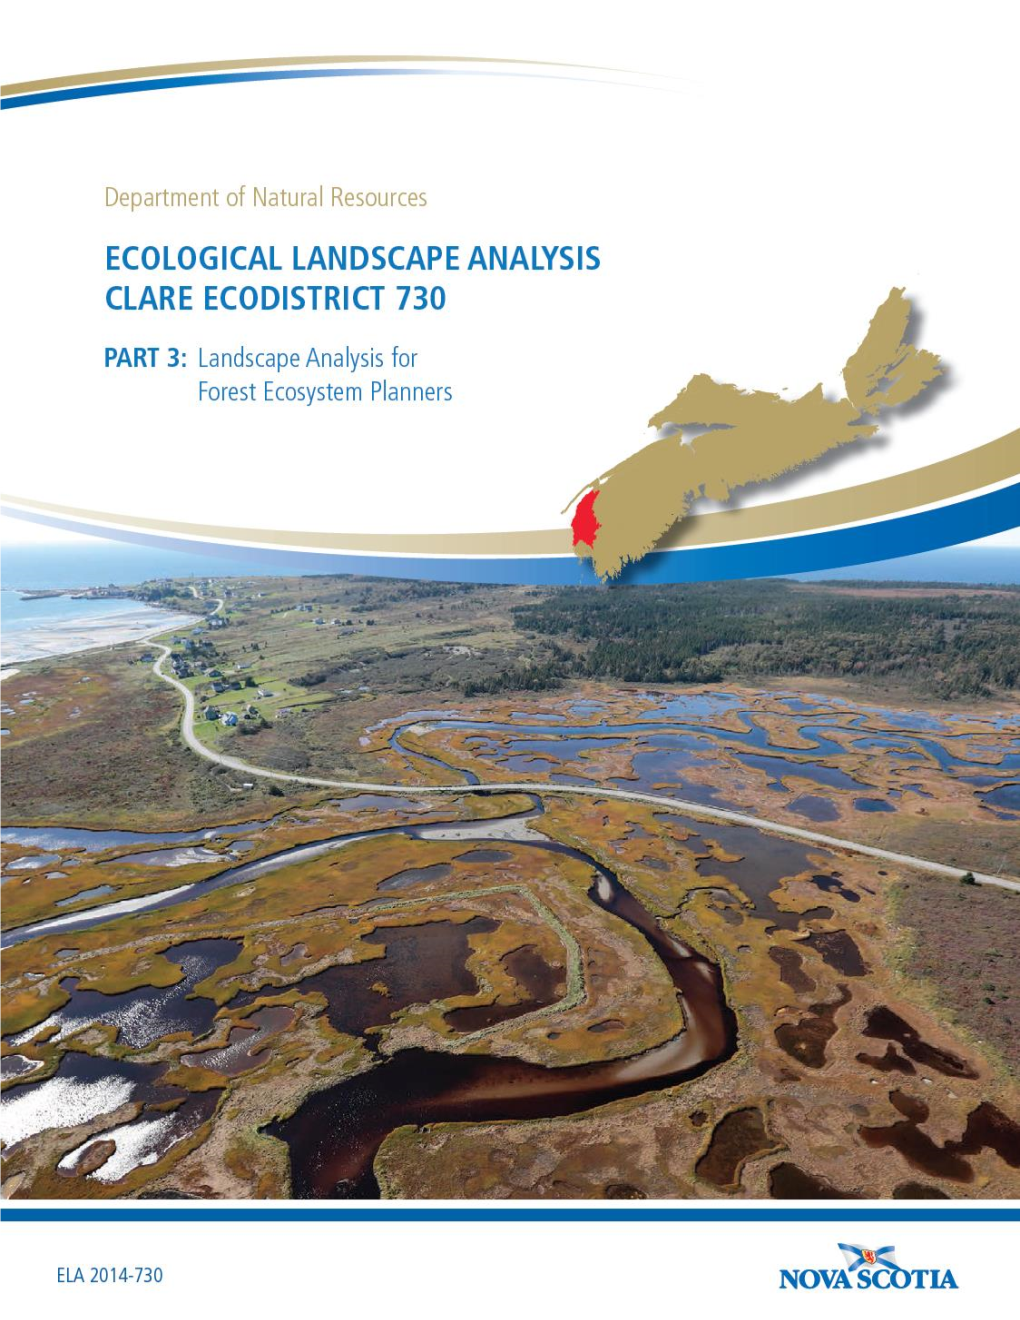 Ecological Landscape Analysis of Clare Ecodistrict 730 40